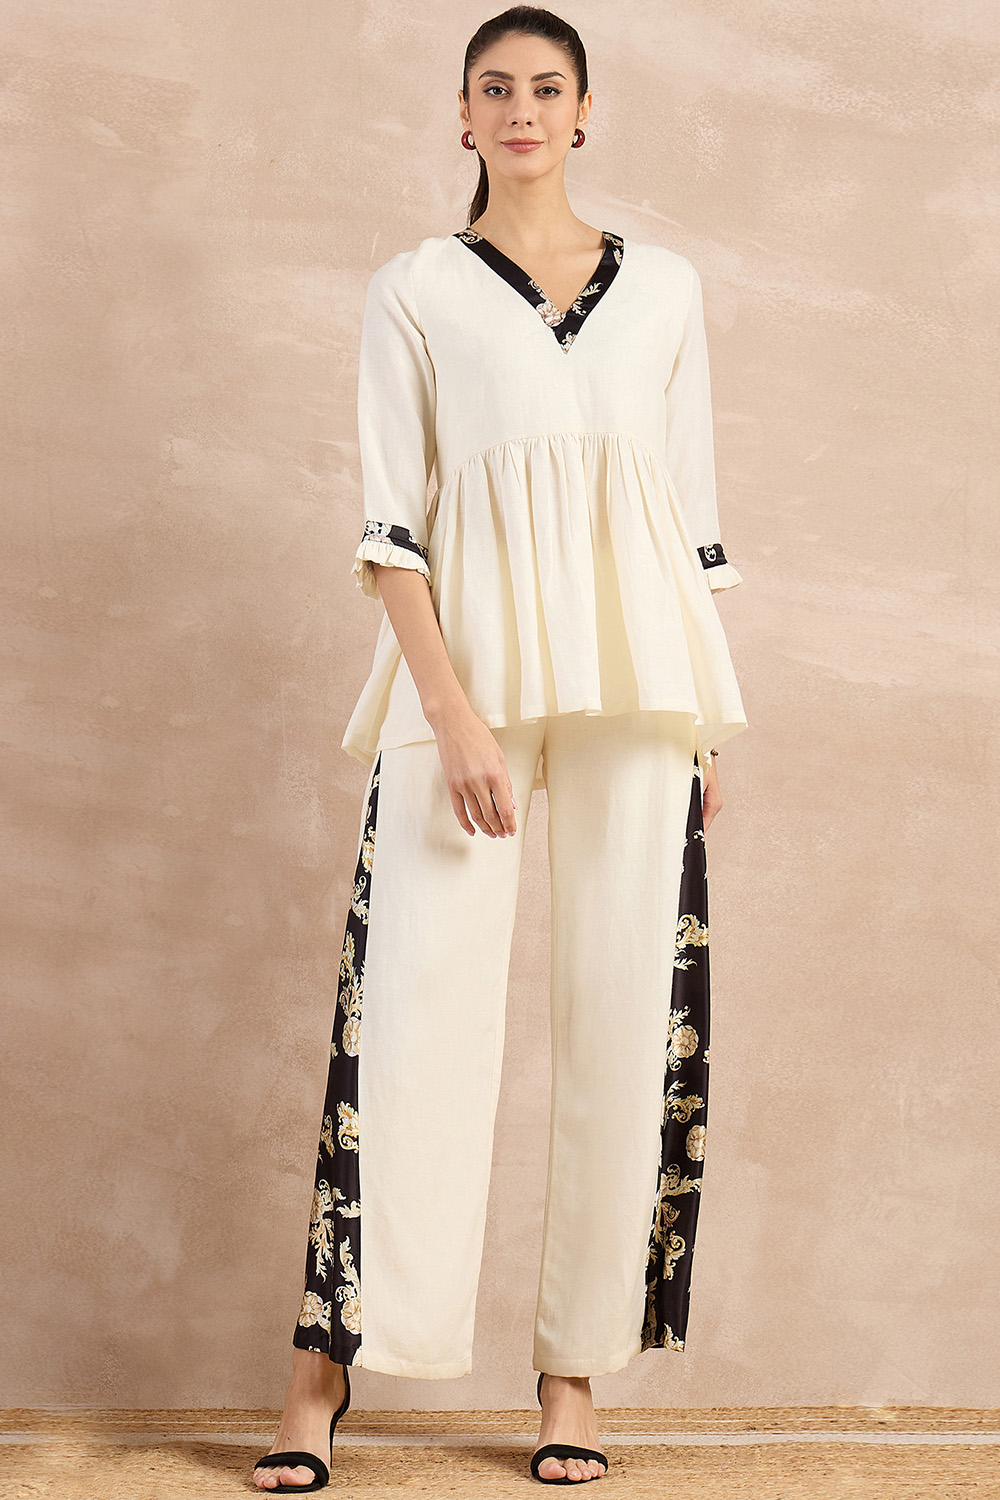 Off-White and Black Baroque Printed Linen Co-ordinate Set